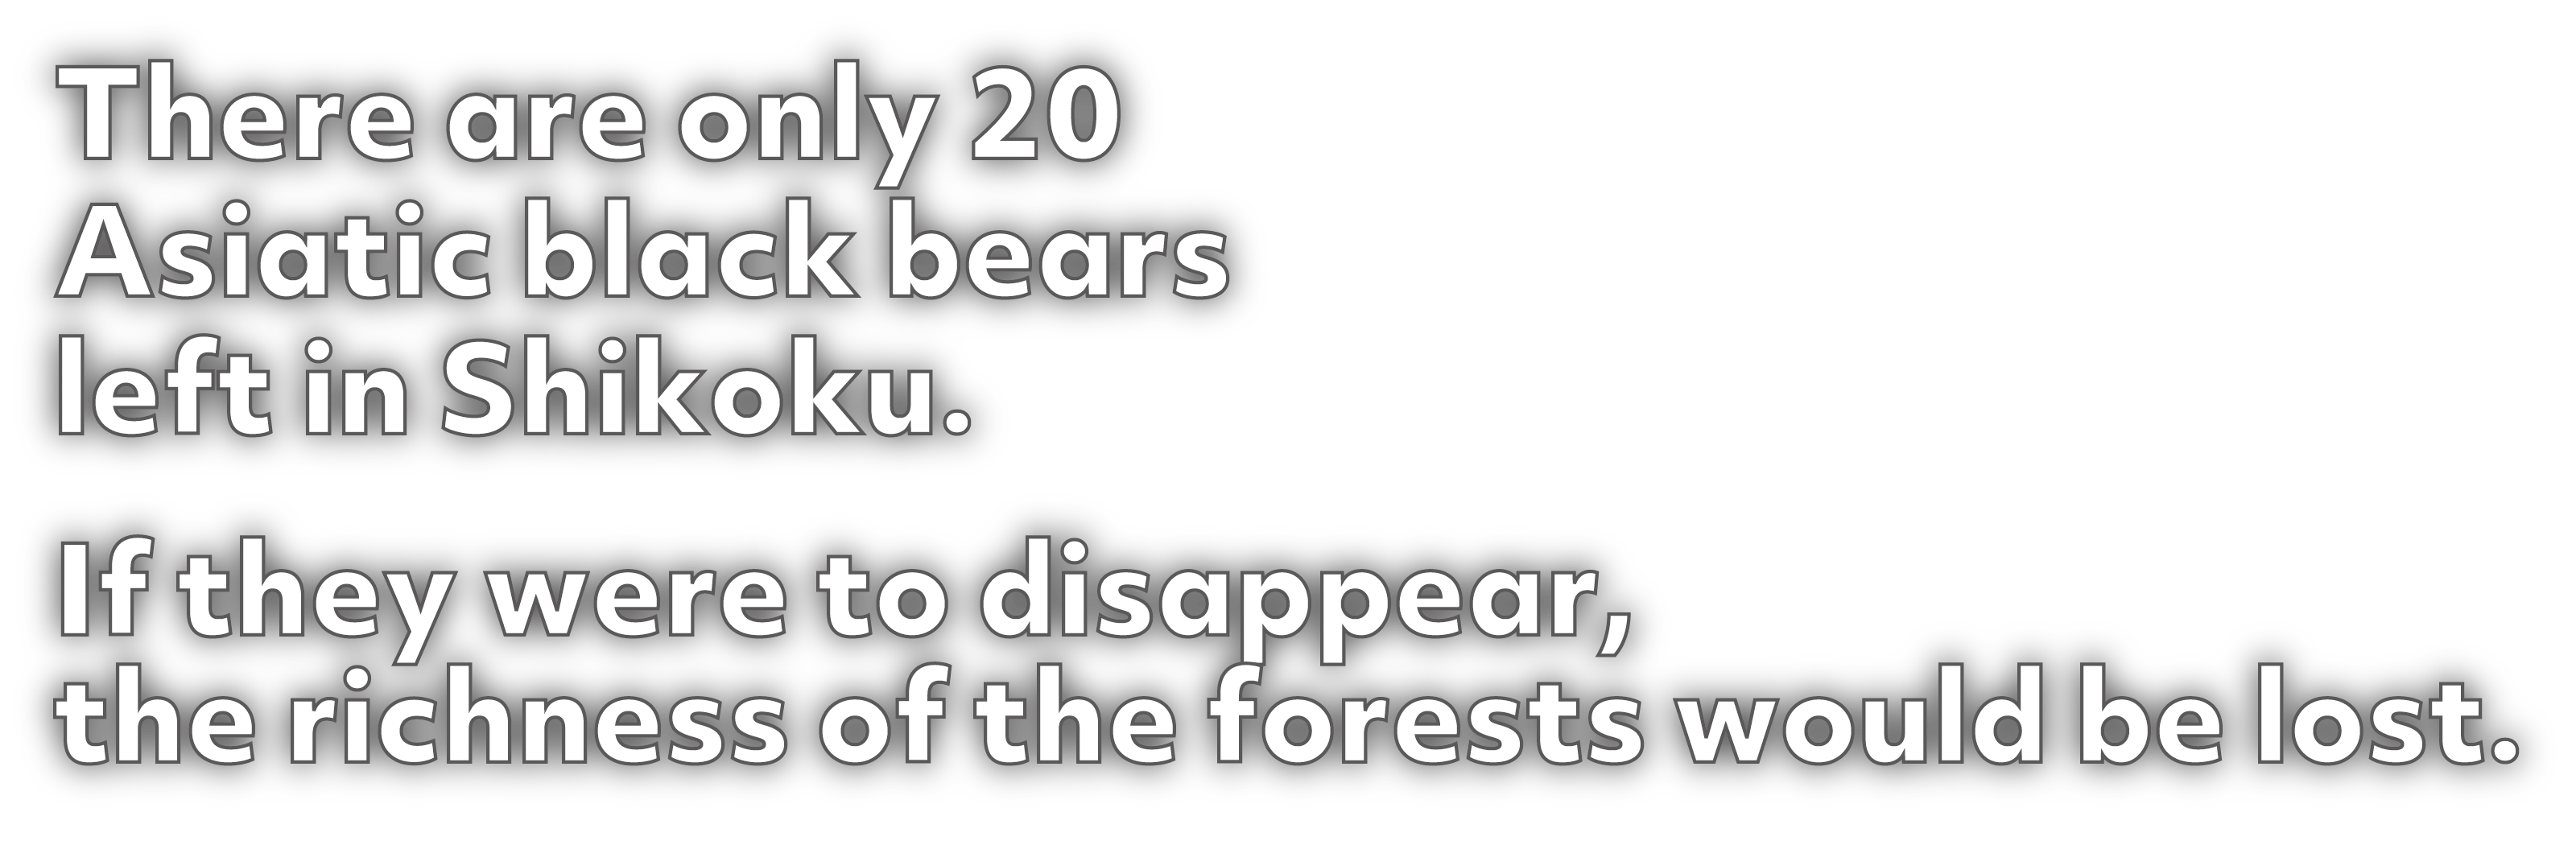 There are only 20 Asiatic black bears left in Shikoku. If they were to disappear, the richness of the forests would be lost.